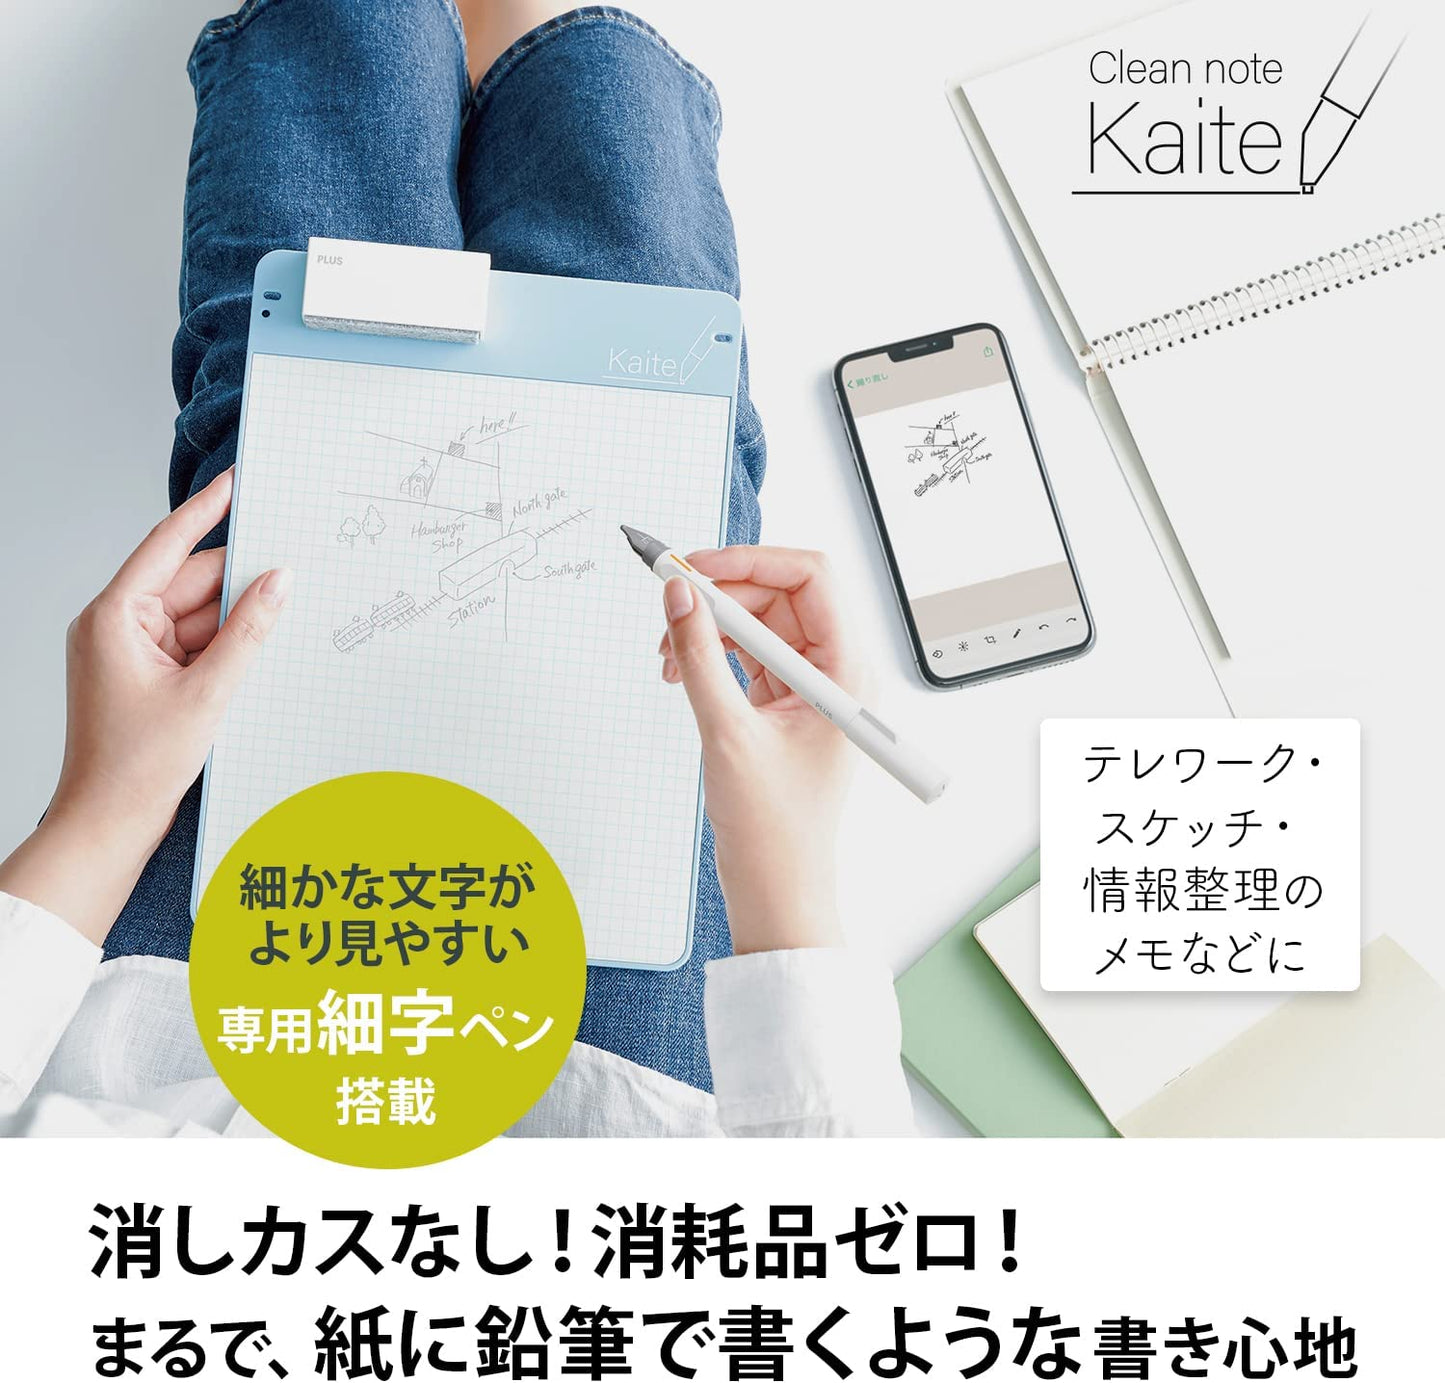 Kaite 2S B5 10.3 inch writing tablet with a GRID